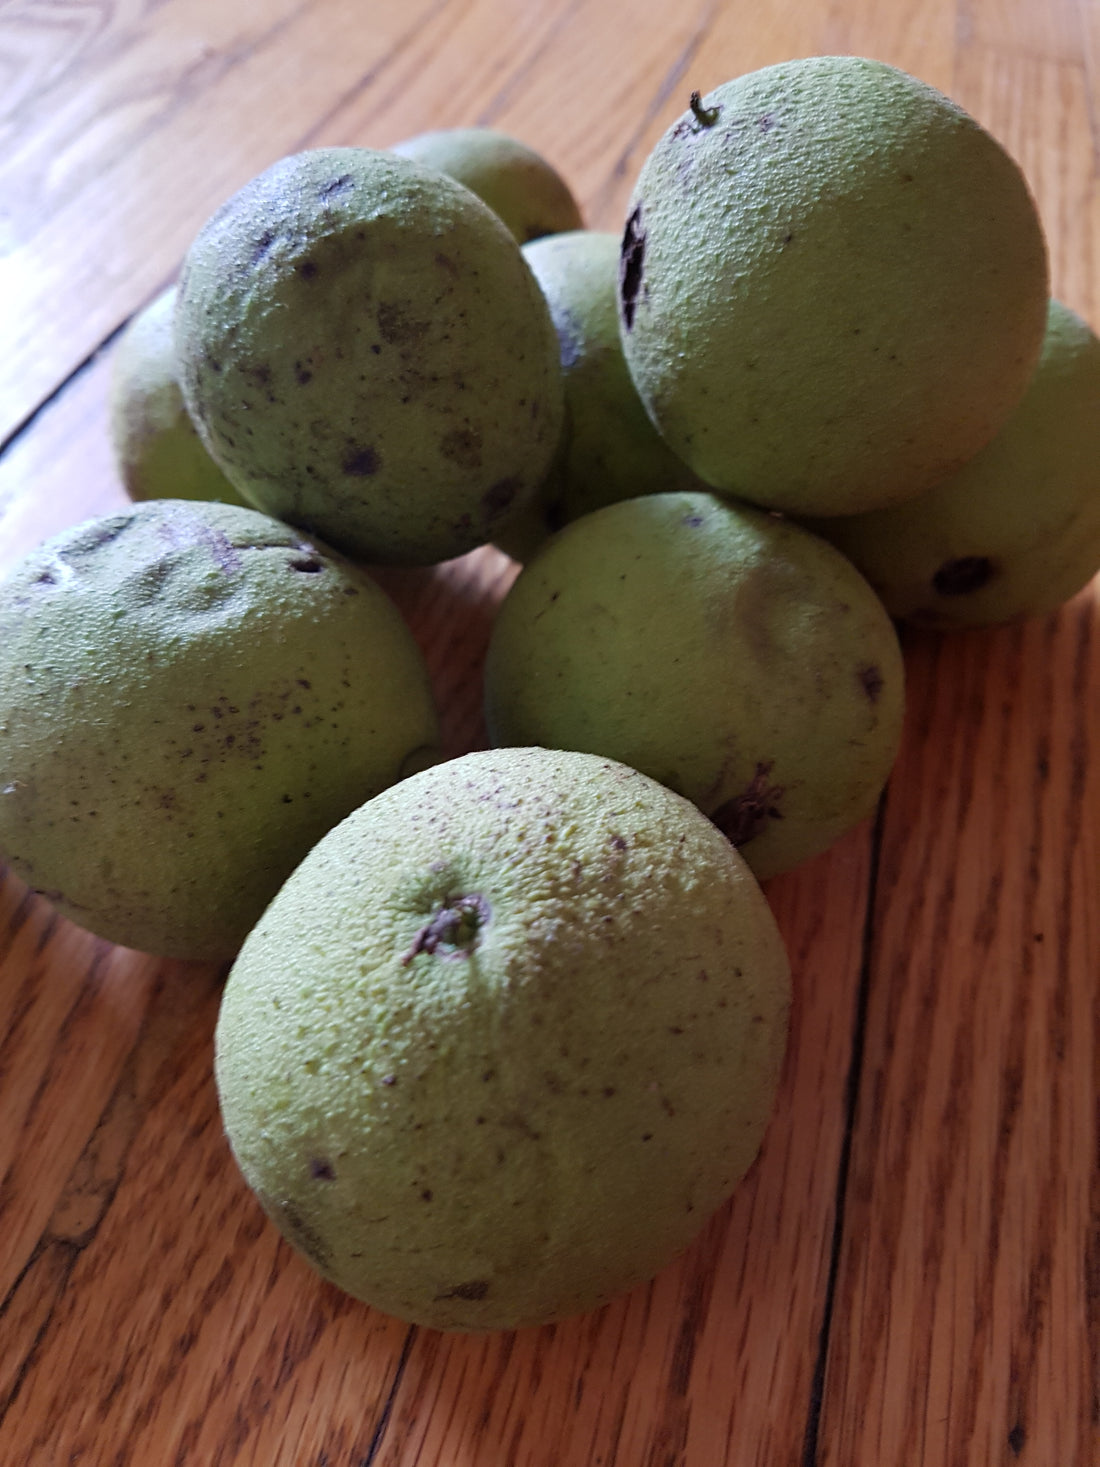 green black walnuts in a pile sitting on a wooden table.